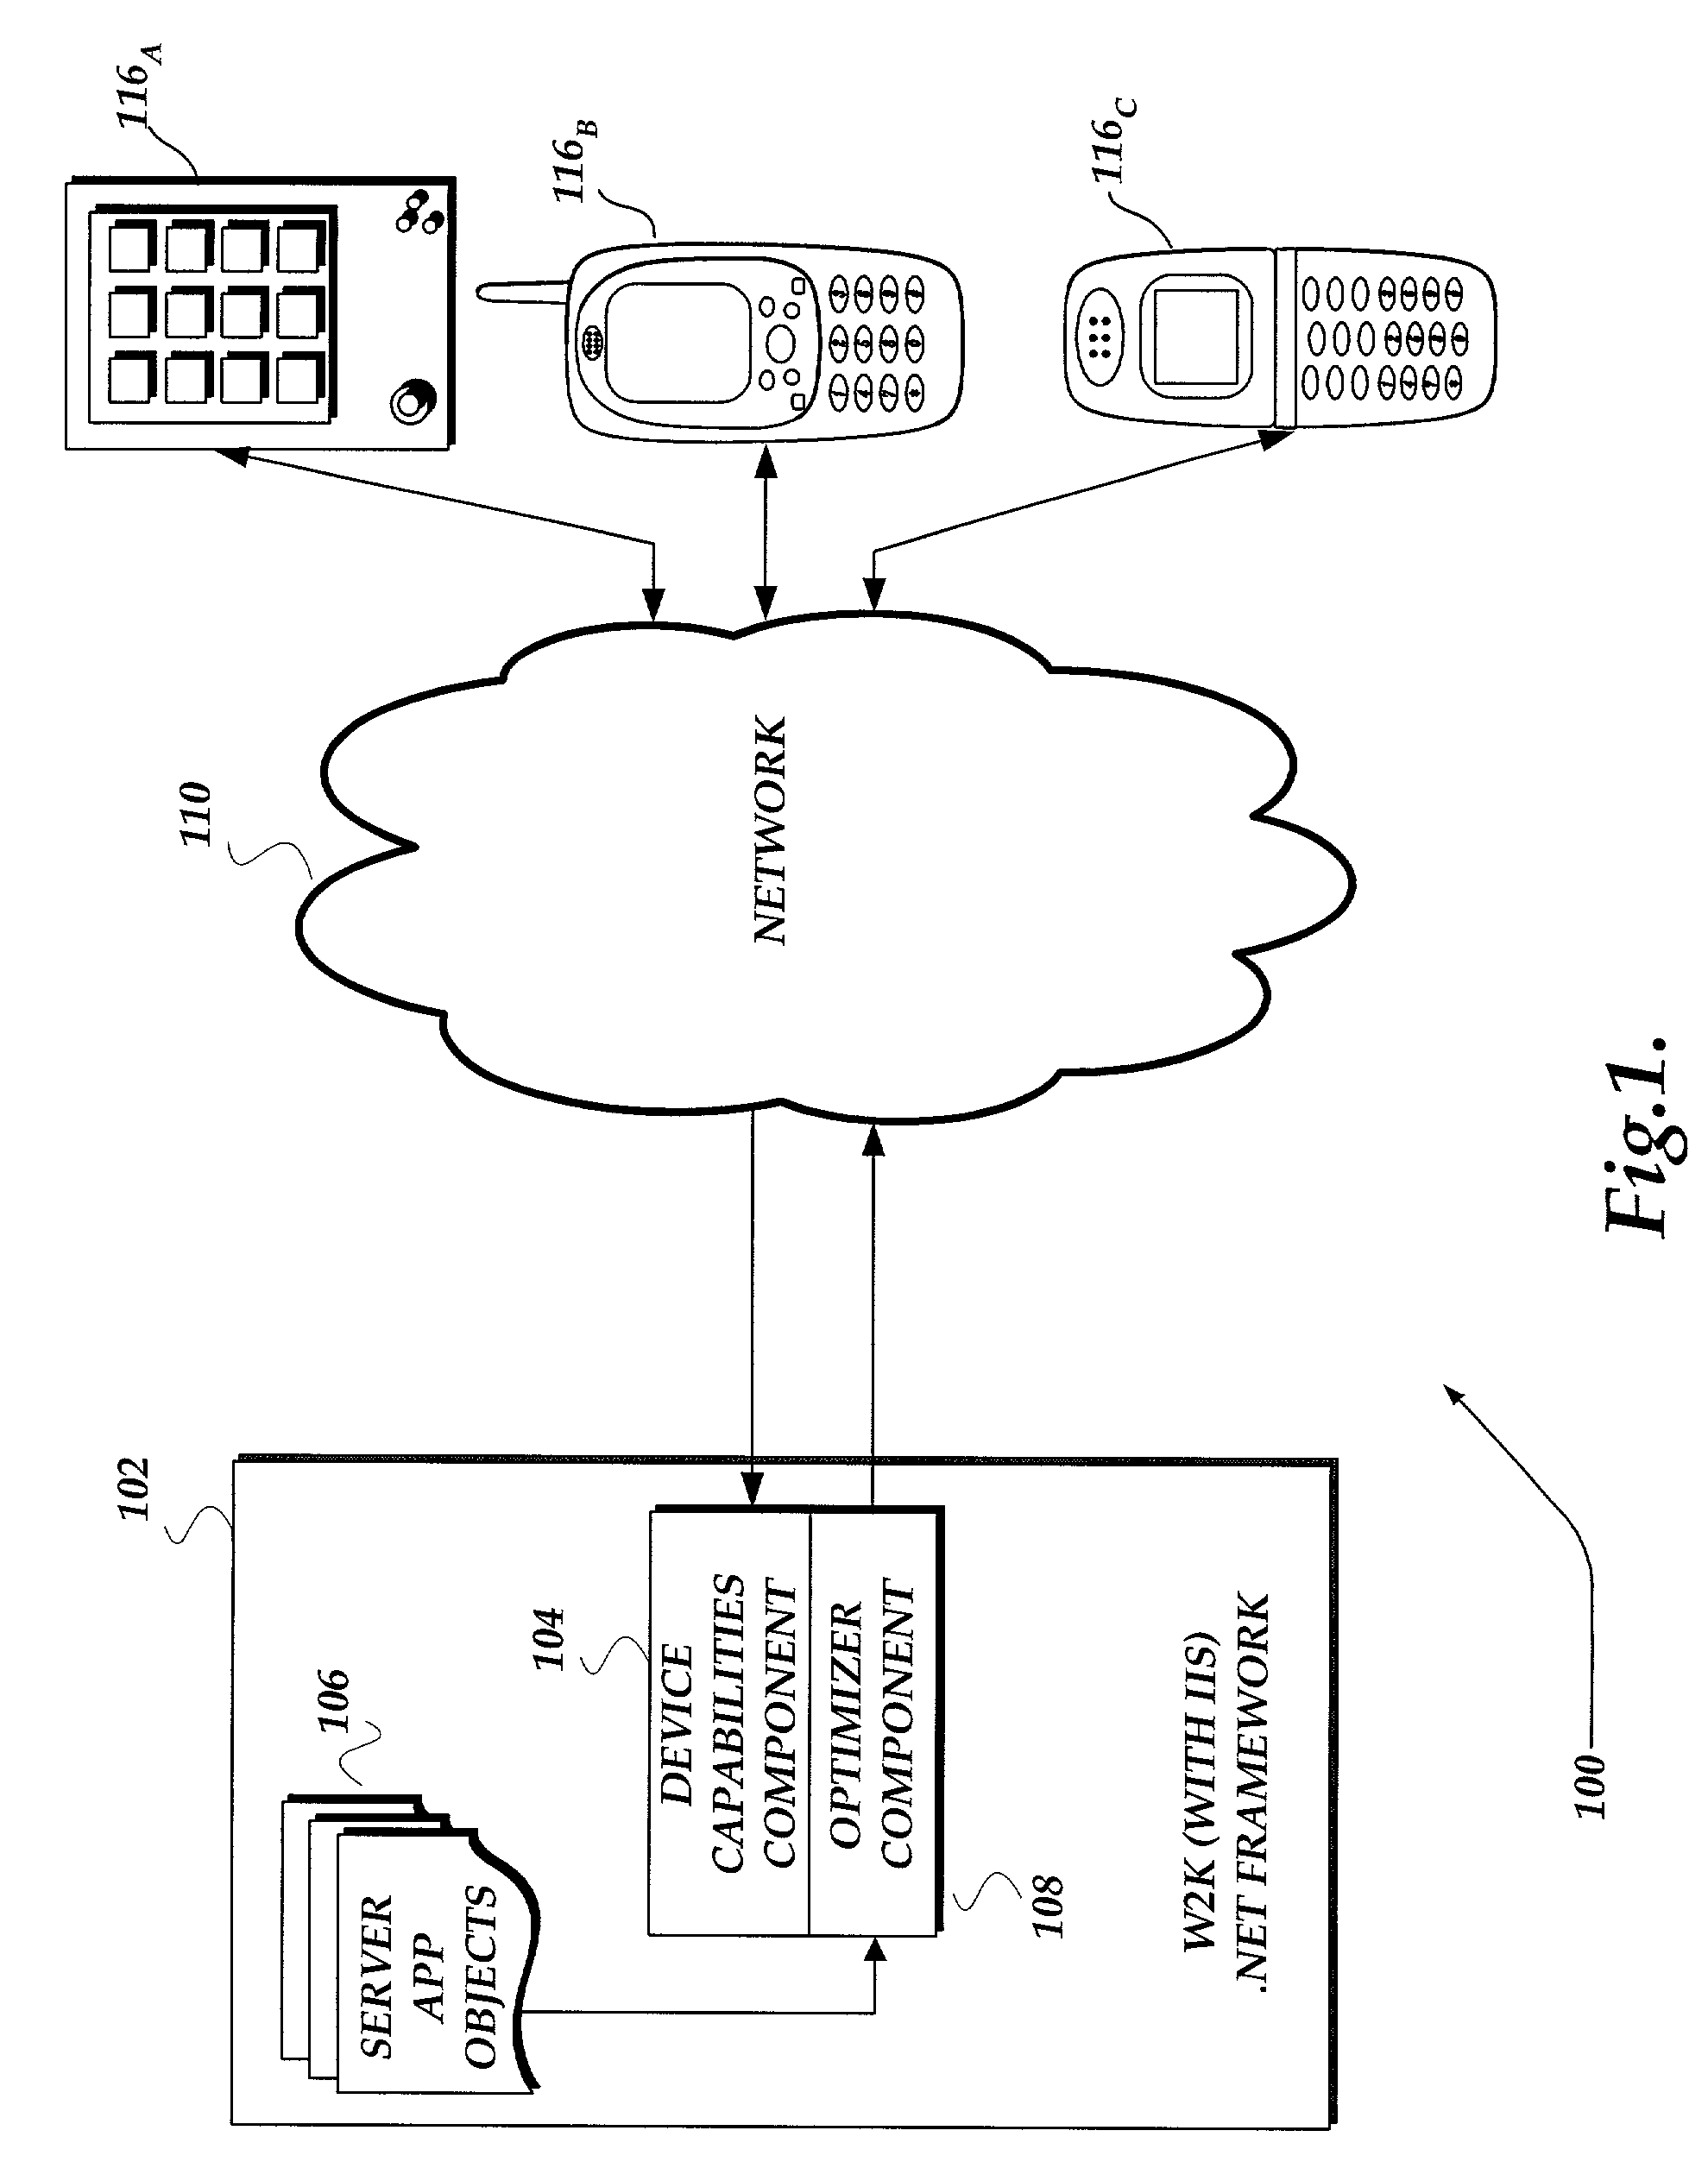 Method and system for predicting optimal HTML structure without look-ahead